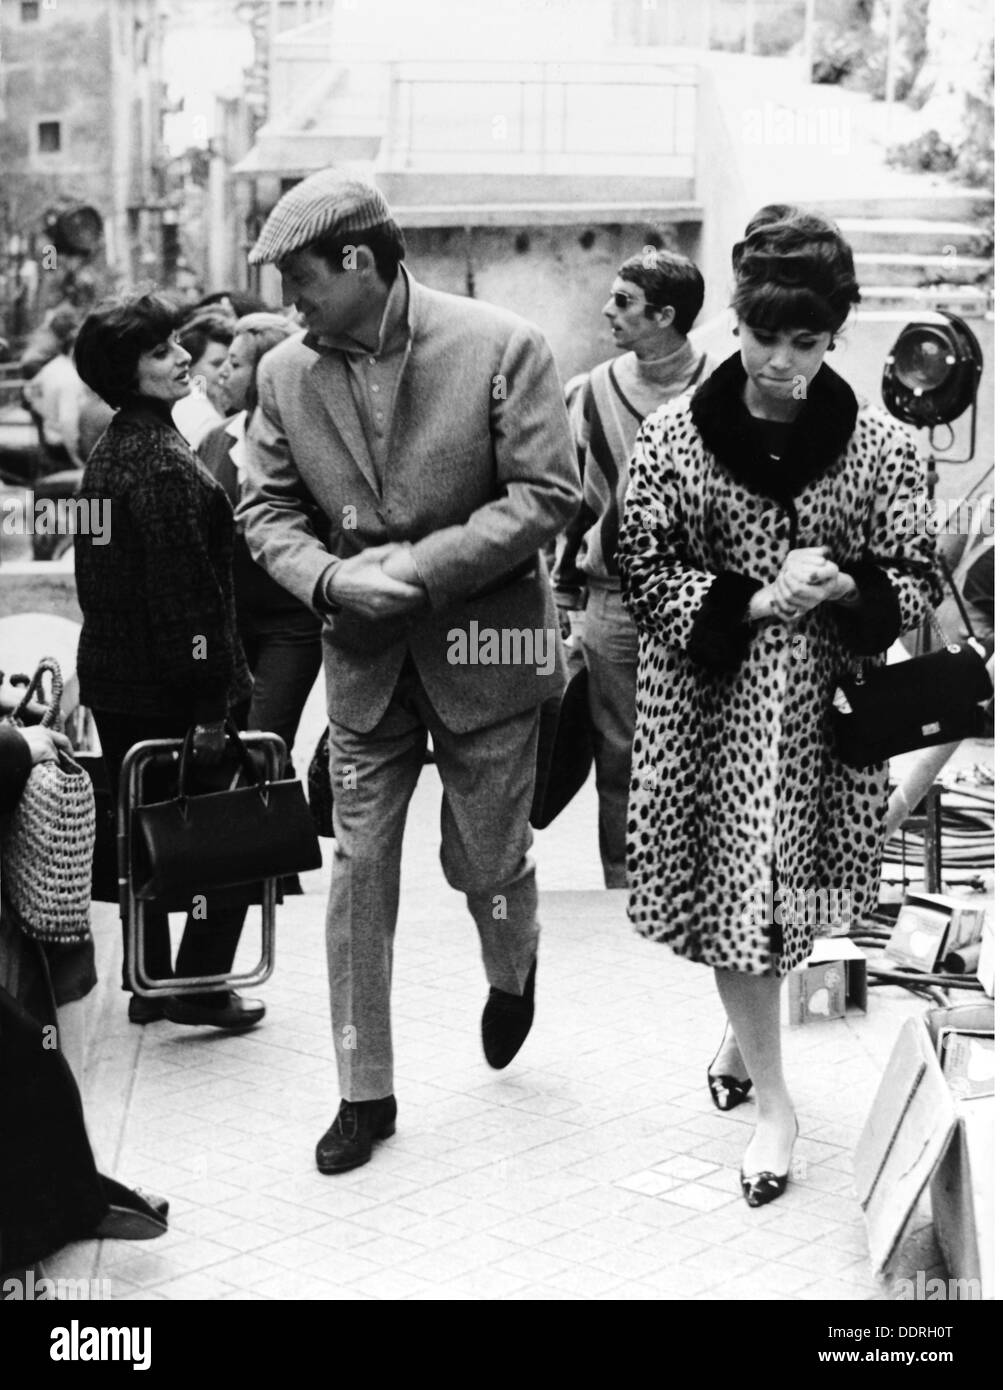 Belmondo, Jean-Paul, * 9.4.1933, French actor, half length, with first wife Renee 'Elodie' Constantin, Villefranche-sur-Mer, March 1963, Stock Photo